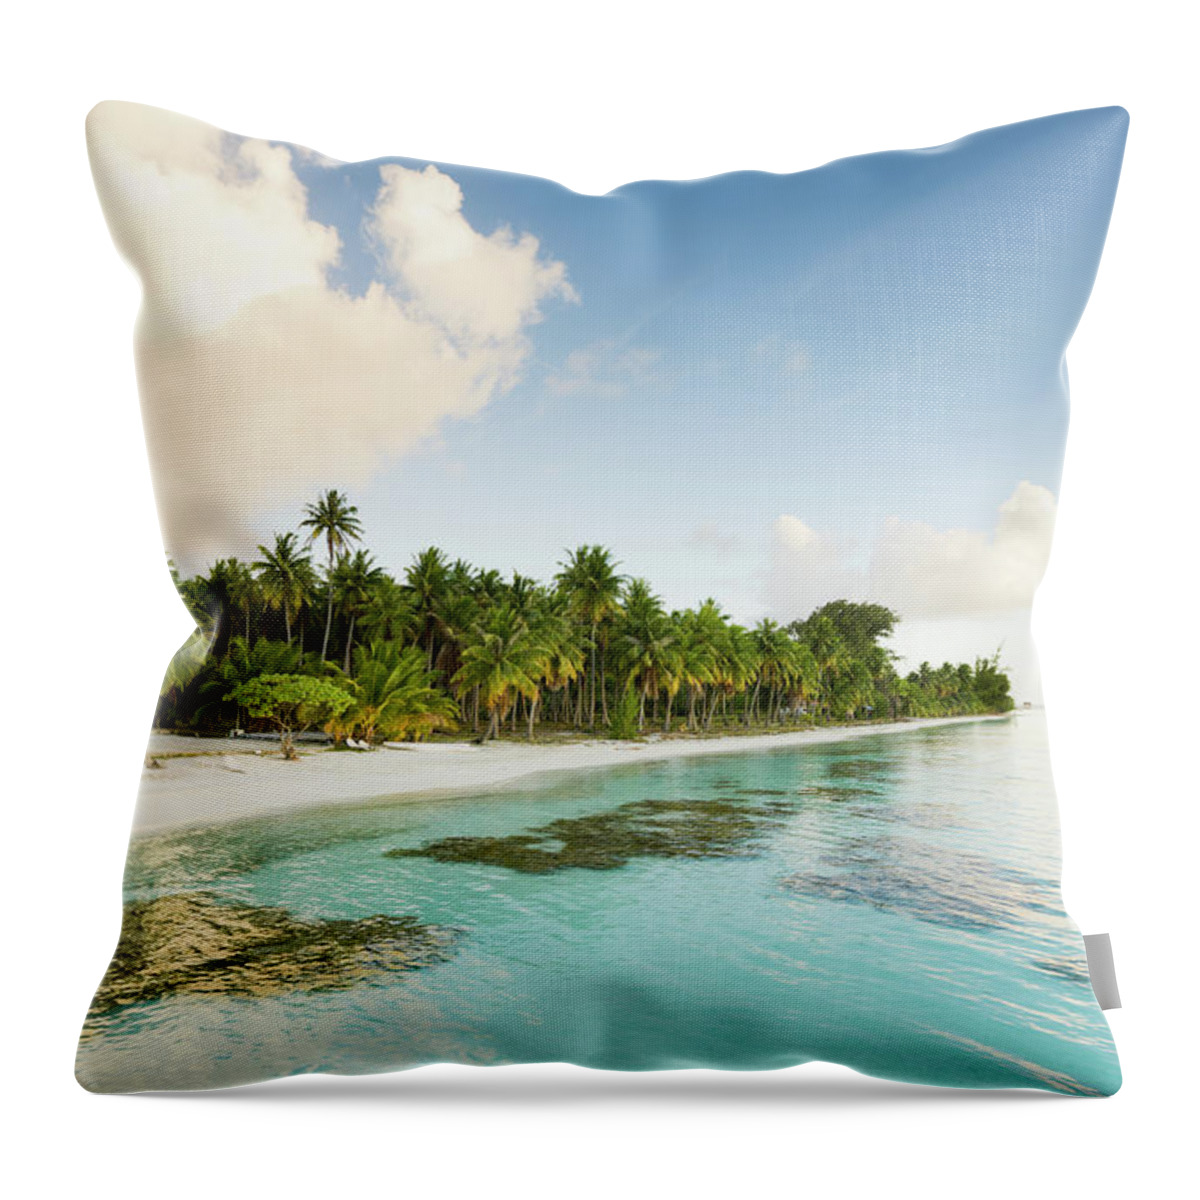 Scenics Throw Pillow featuring the photograph Dream Beach White Sand And Palm Trees by Mlenny